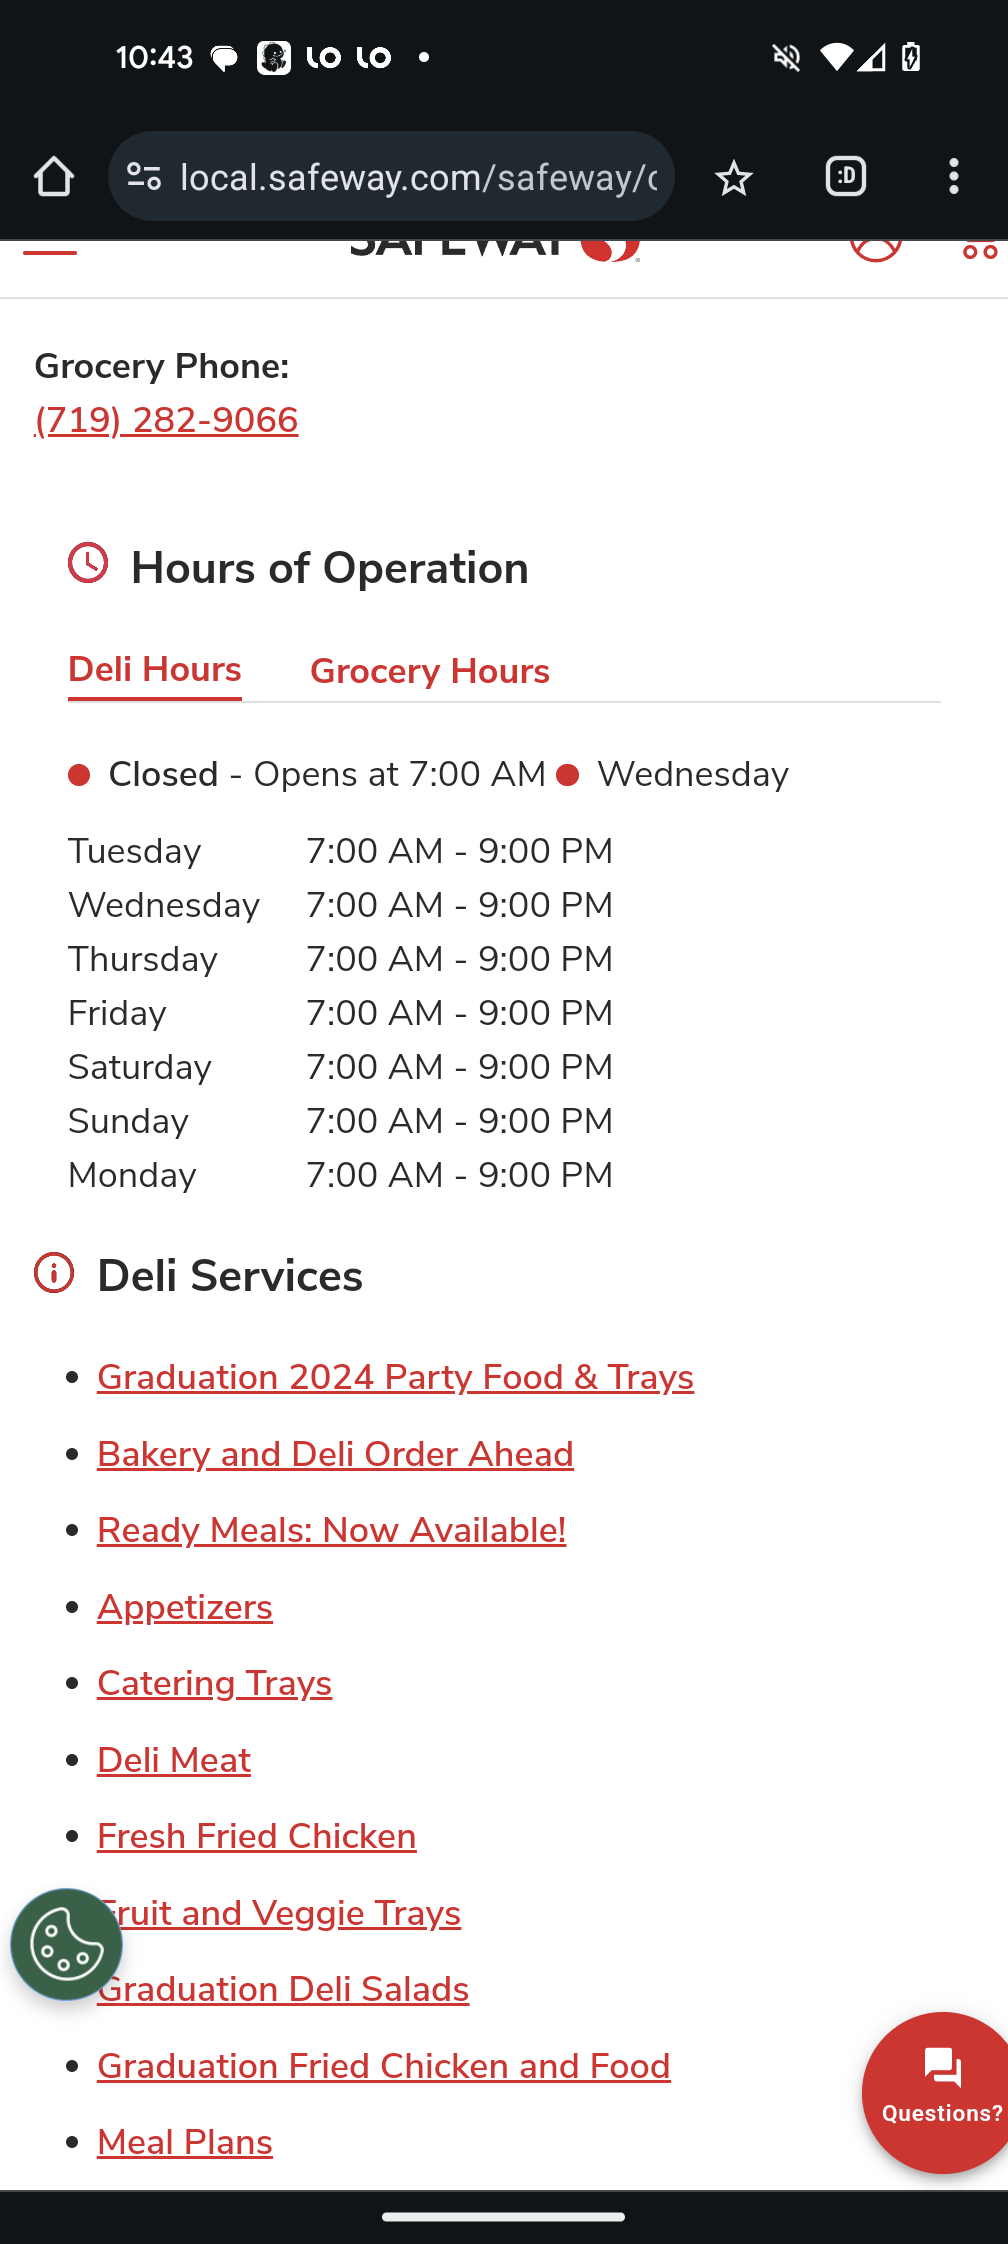 Store deli hours on their own website